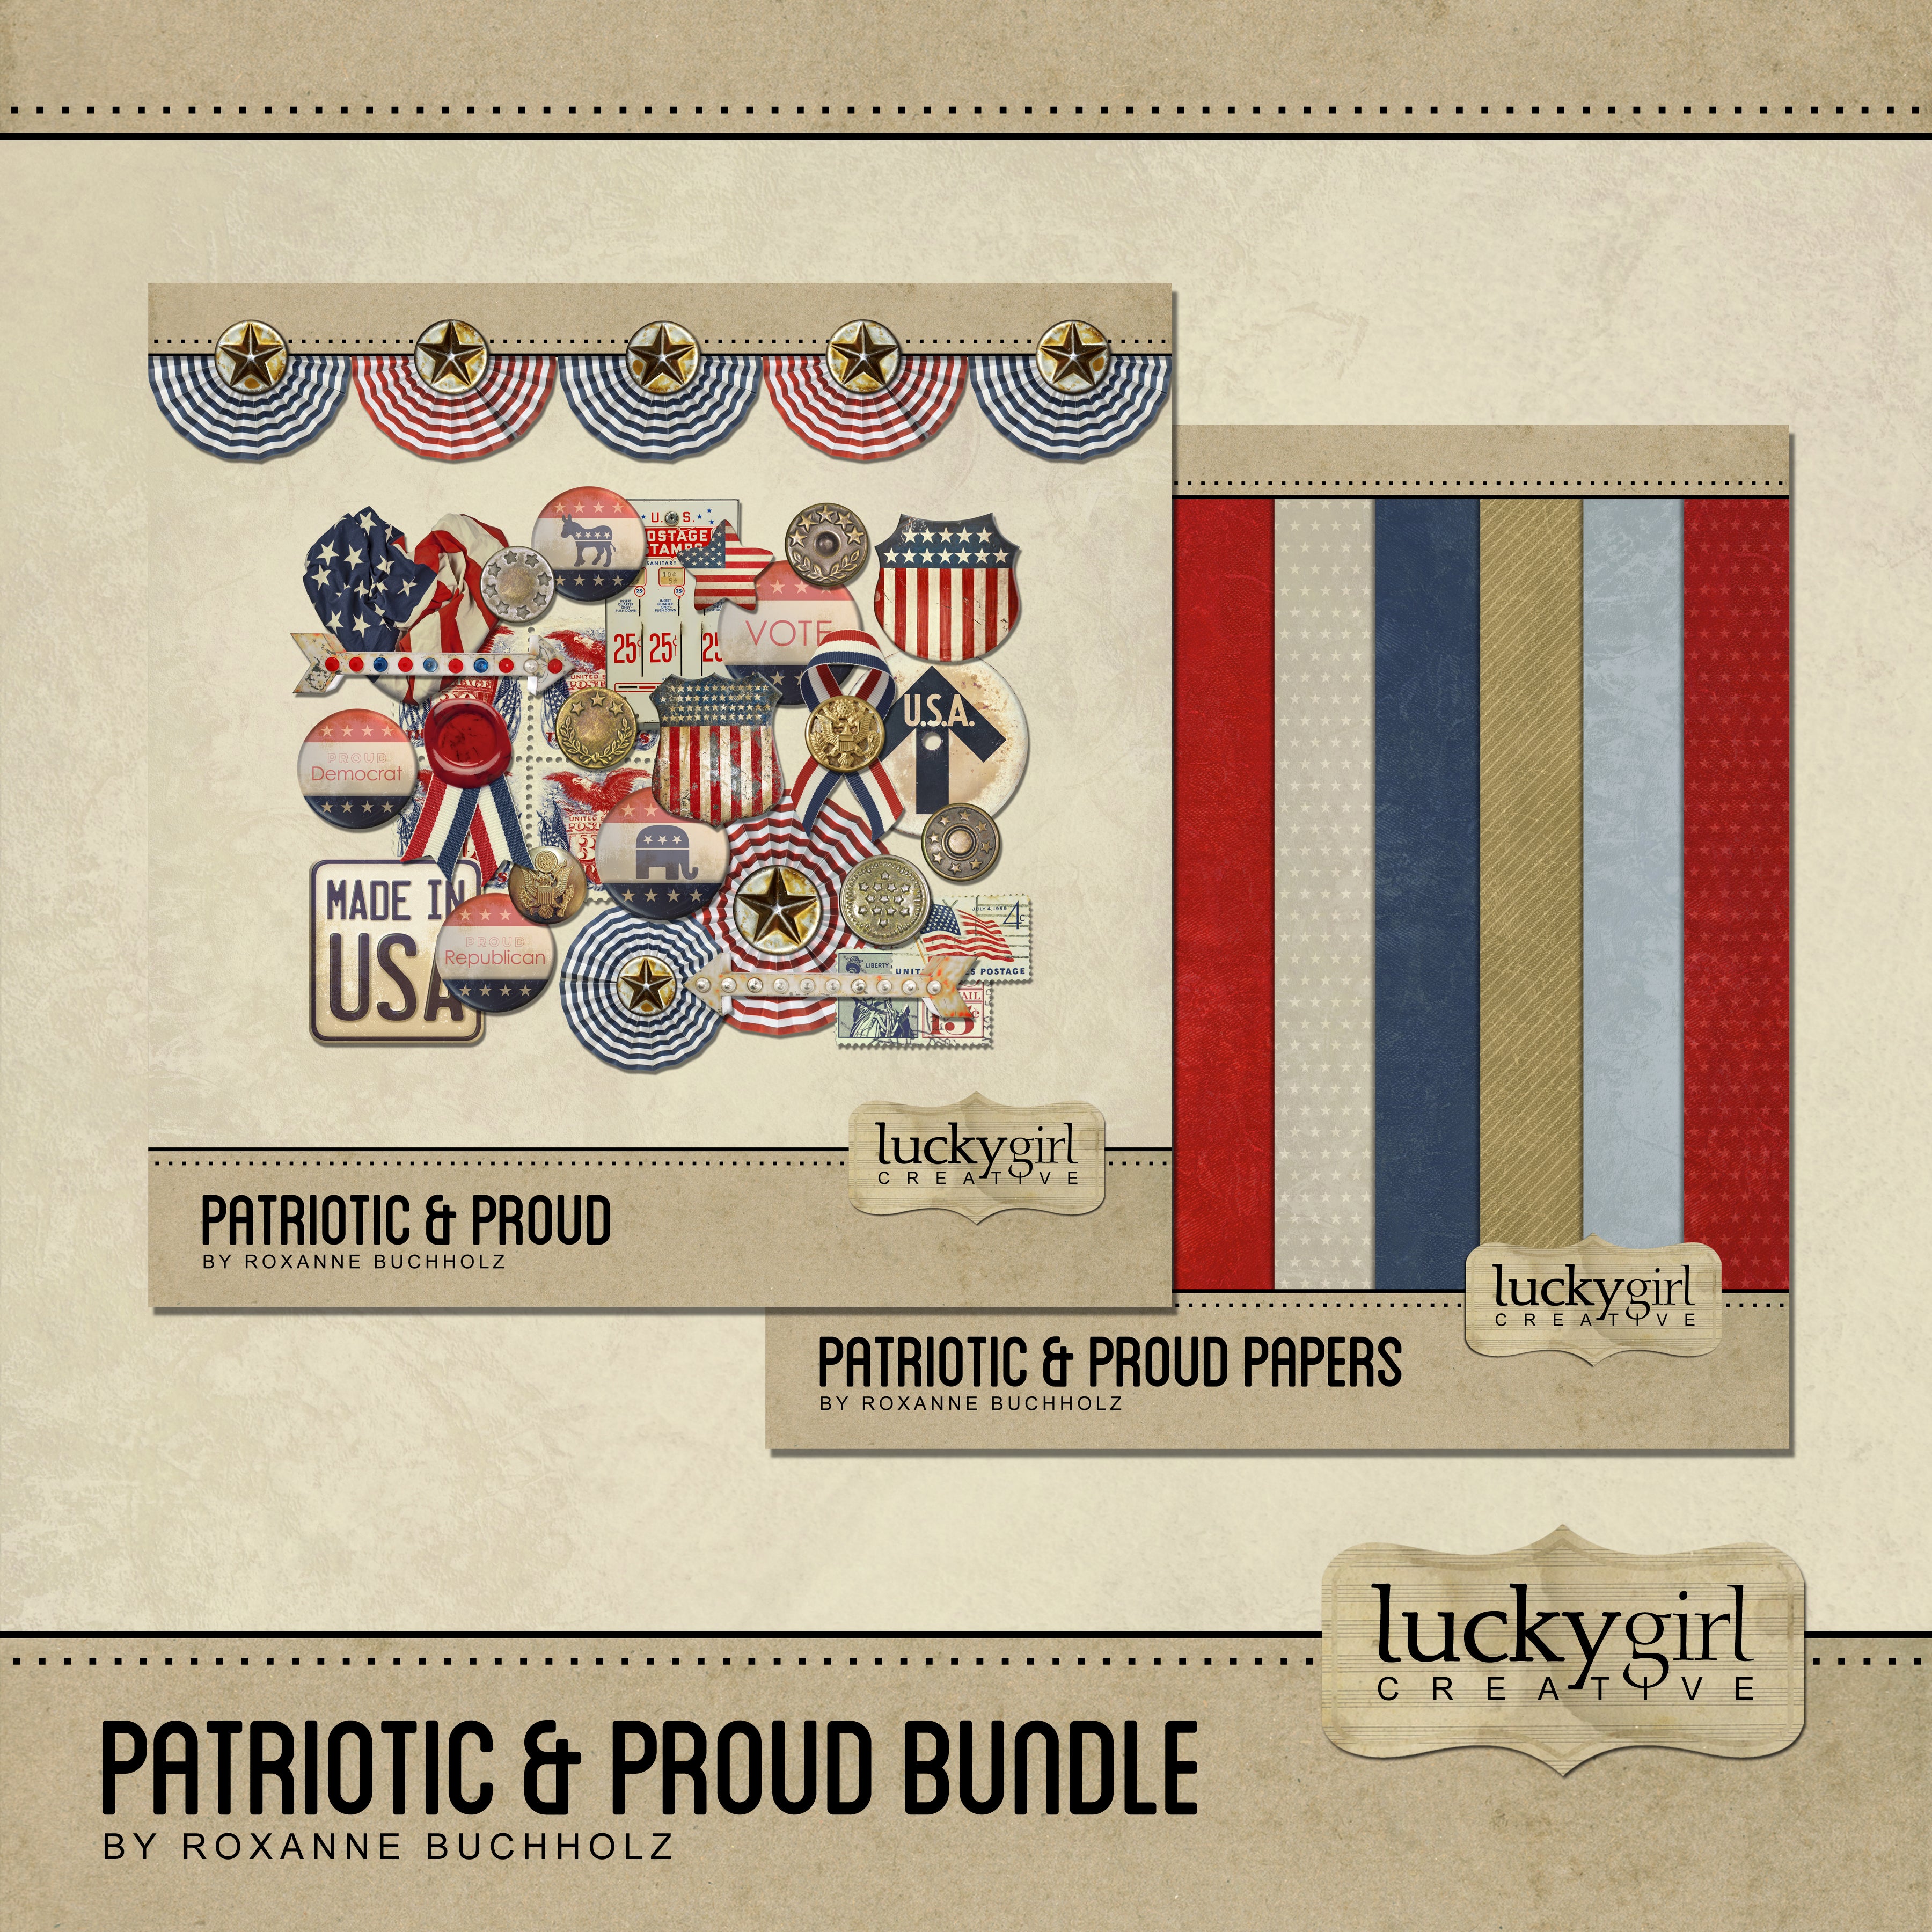 Patriotic and Proud is what you'll feel when you use this digital art bundle to accent your Fourth of July and Independence Day activities or your right to vote in the election! Filled with vintage-inspired embellishments including United States postage stamps and stamp machine, lighted signage arrows, patriotic ribbons, star buttons, antique metal signs, voter buttons for the Democrat or Republican, and red, white, and blue buntings for the holiday to celebrate America.